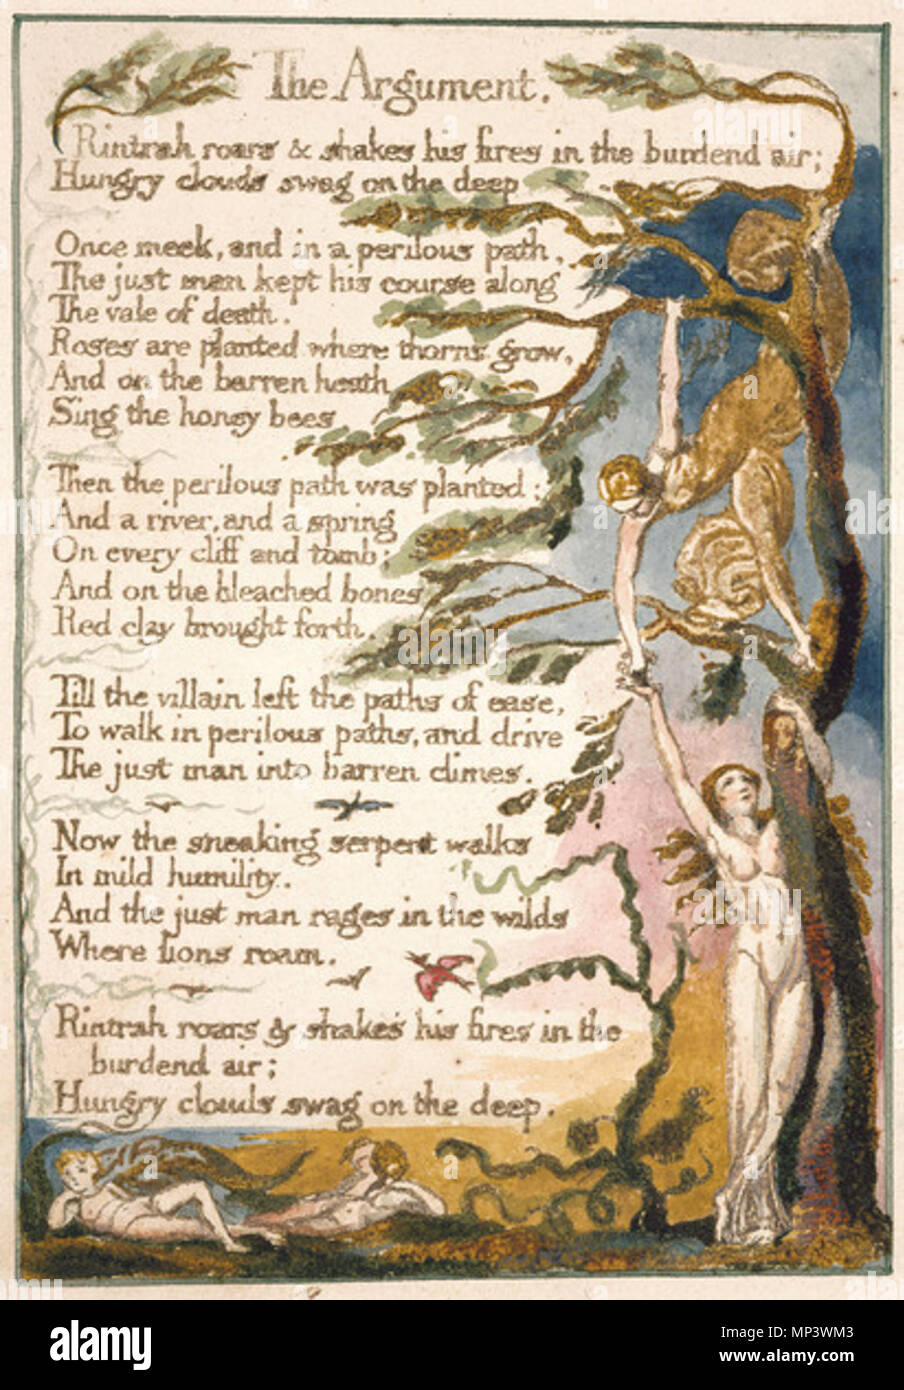 .  English: The Marriage of Heaven and Hell copy E 1794 Fitzwilliam Museum object 2 . 1794.    William Blake  (1757–1827)       Alternative names W. Blake; Uil'iam Bleik  Description British painter, poet, writer, theologian, collector and engraver  Date of birth/death 28 November 1757 12 August 1827  Location of birth/death Broadwick Street Charing Cross  Work location London  Authority control  : Q41513 VIAF: 54144439 ISNI: 0000 0001 2096 135X ULAN: 500012489 LCCN: n78095331 NLA: 35019221 WorldCat 1177 The Marriage of Heaven and Hell copy E 1794 Fitzwilliam Museum object 2 Stock Photo